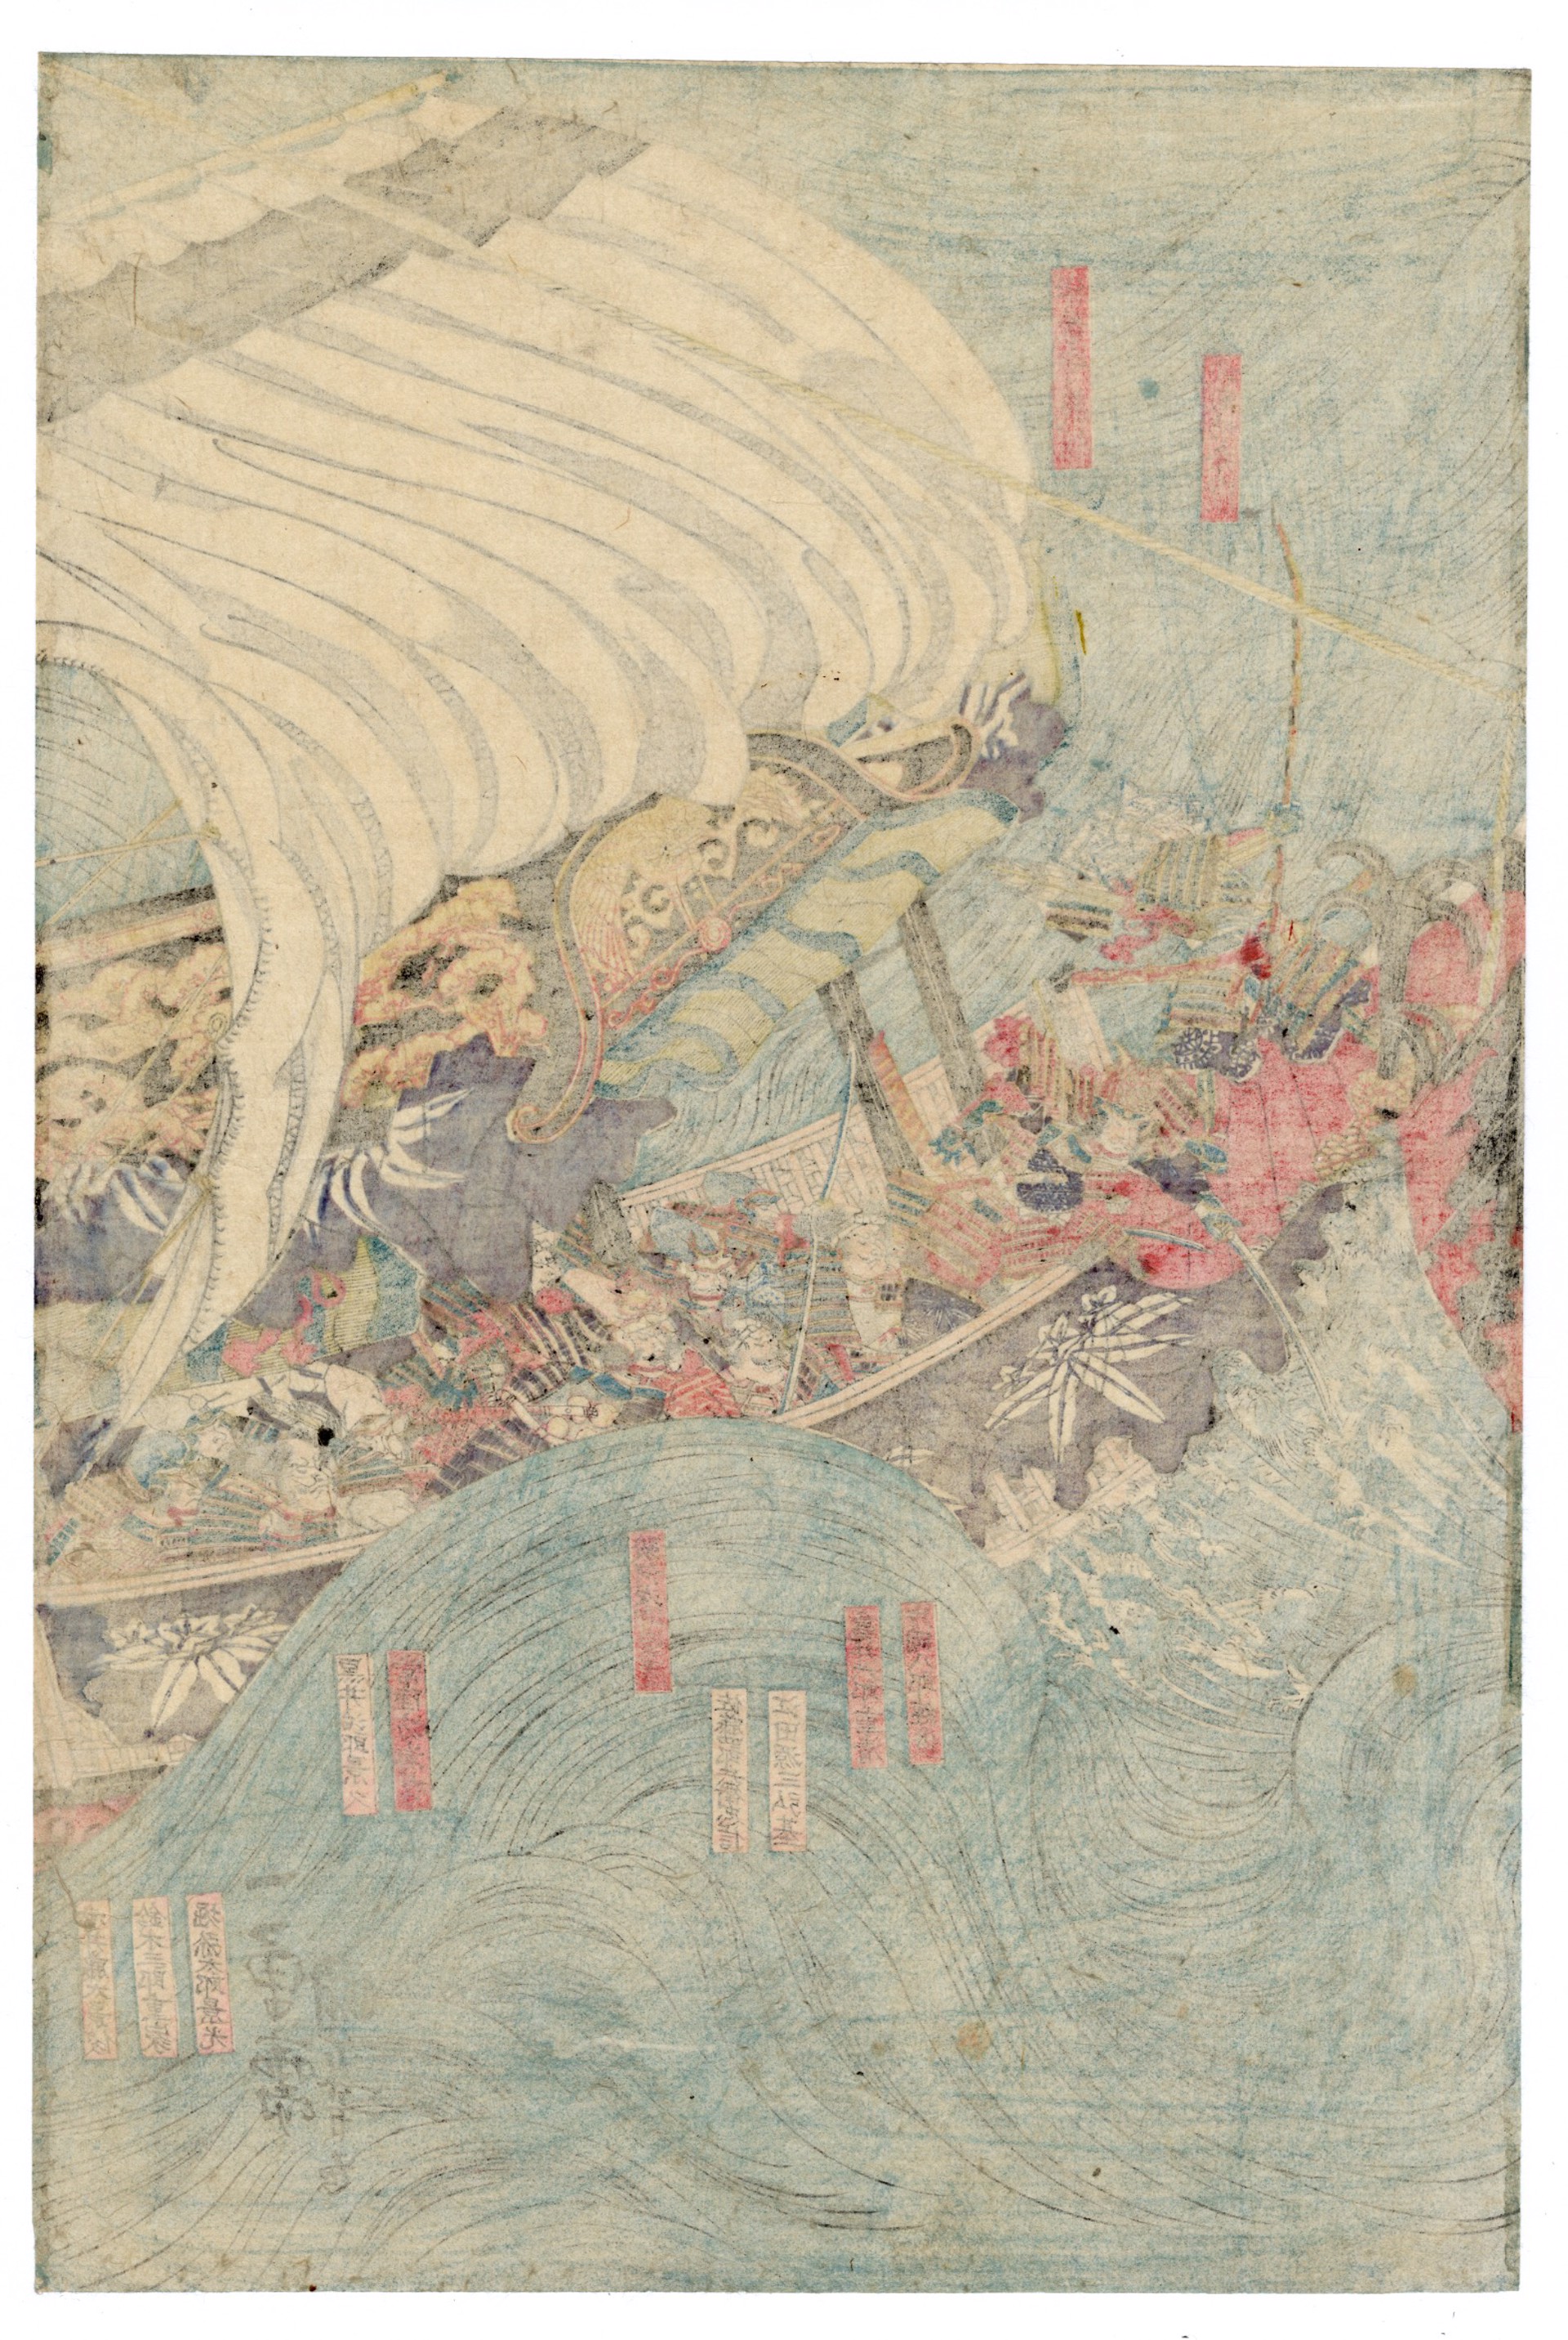 The Ghosts of the Heike Appear at Daimotsu Bay in Settsu by Kuniyoshi